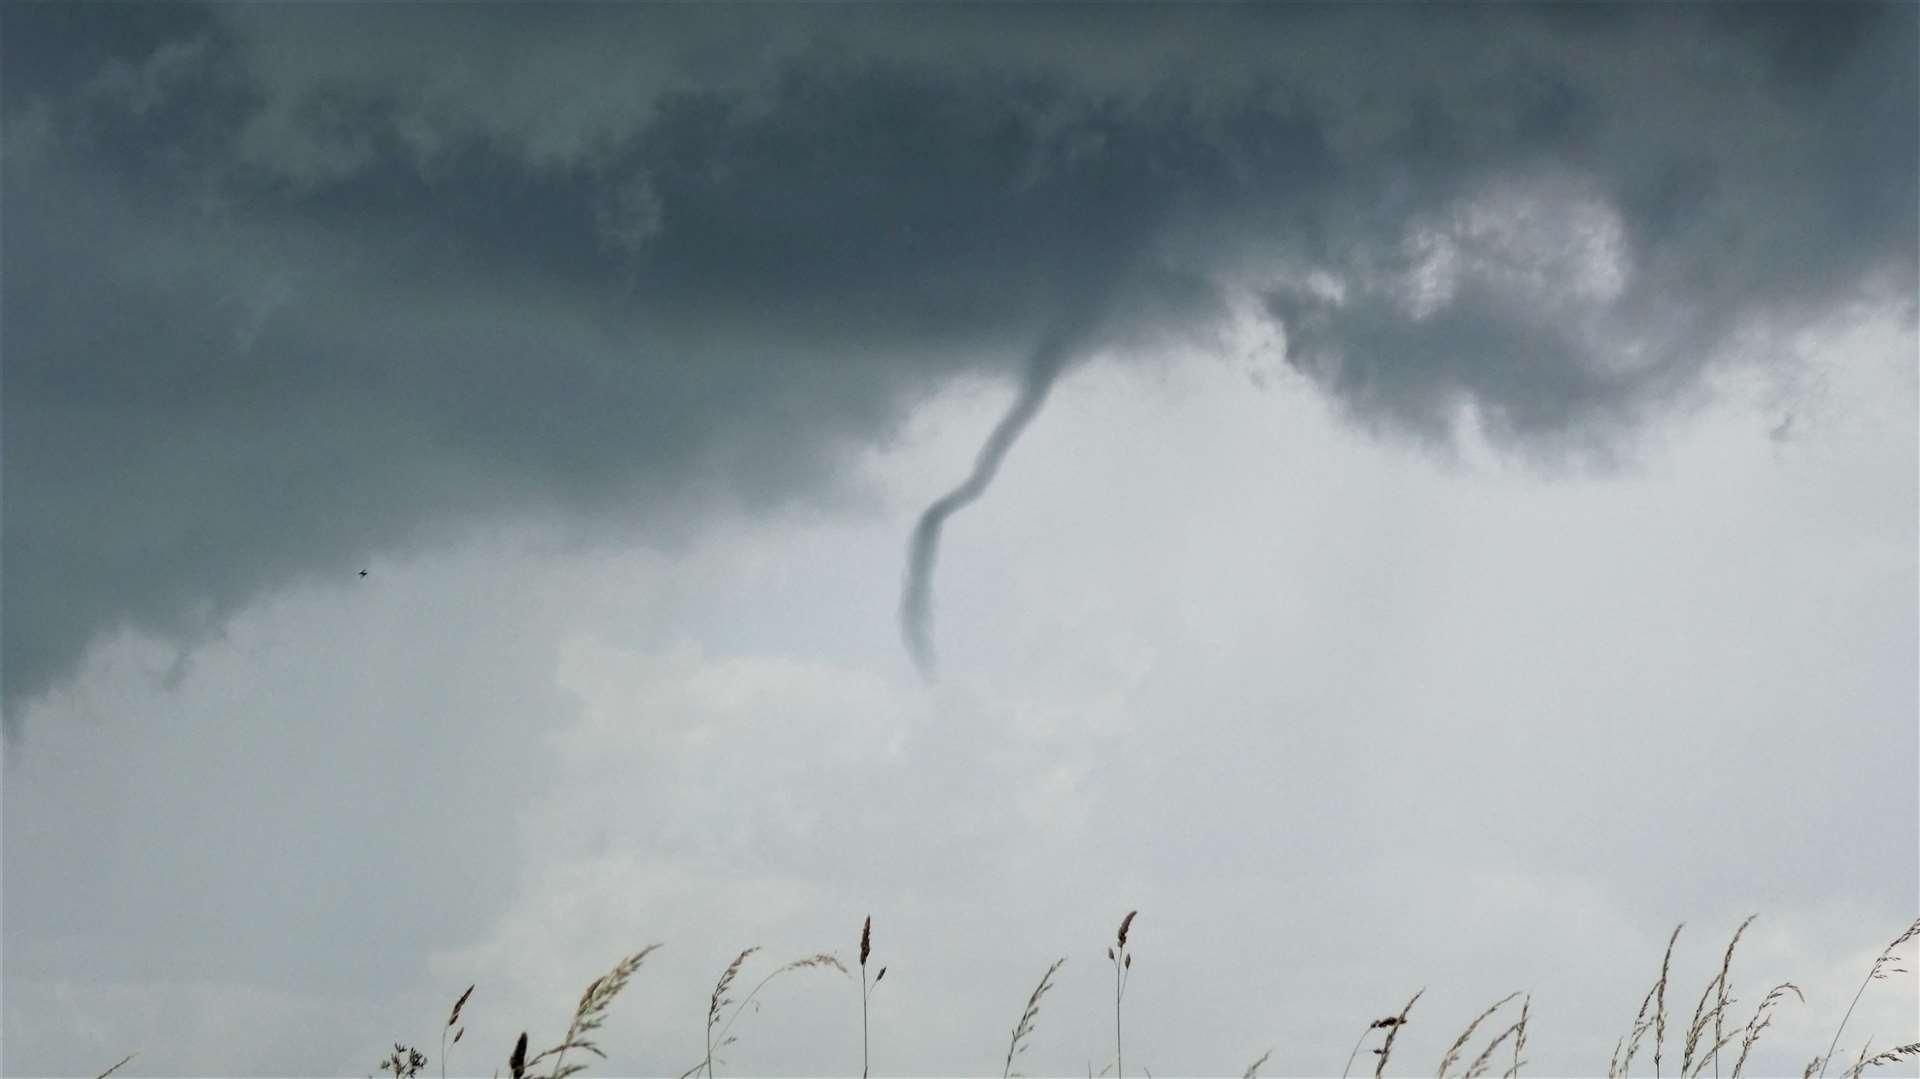 What appears to be a funnel cloud seen near Castletown today by Suzie Hay.